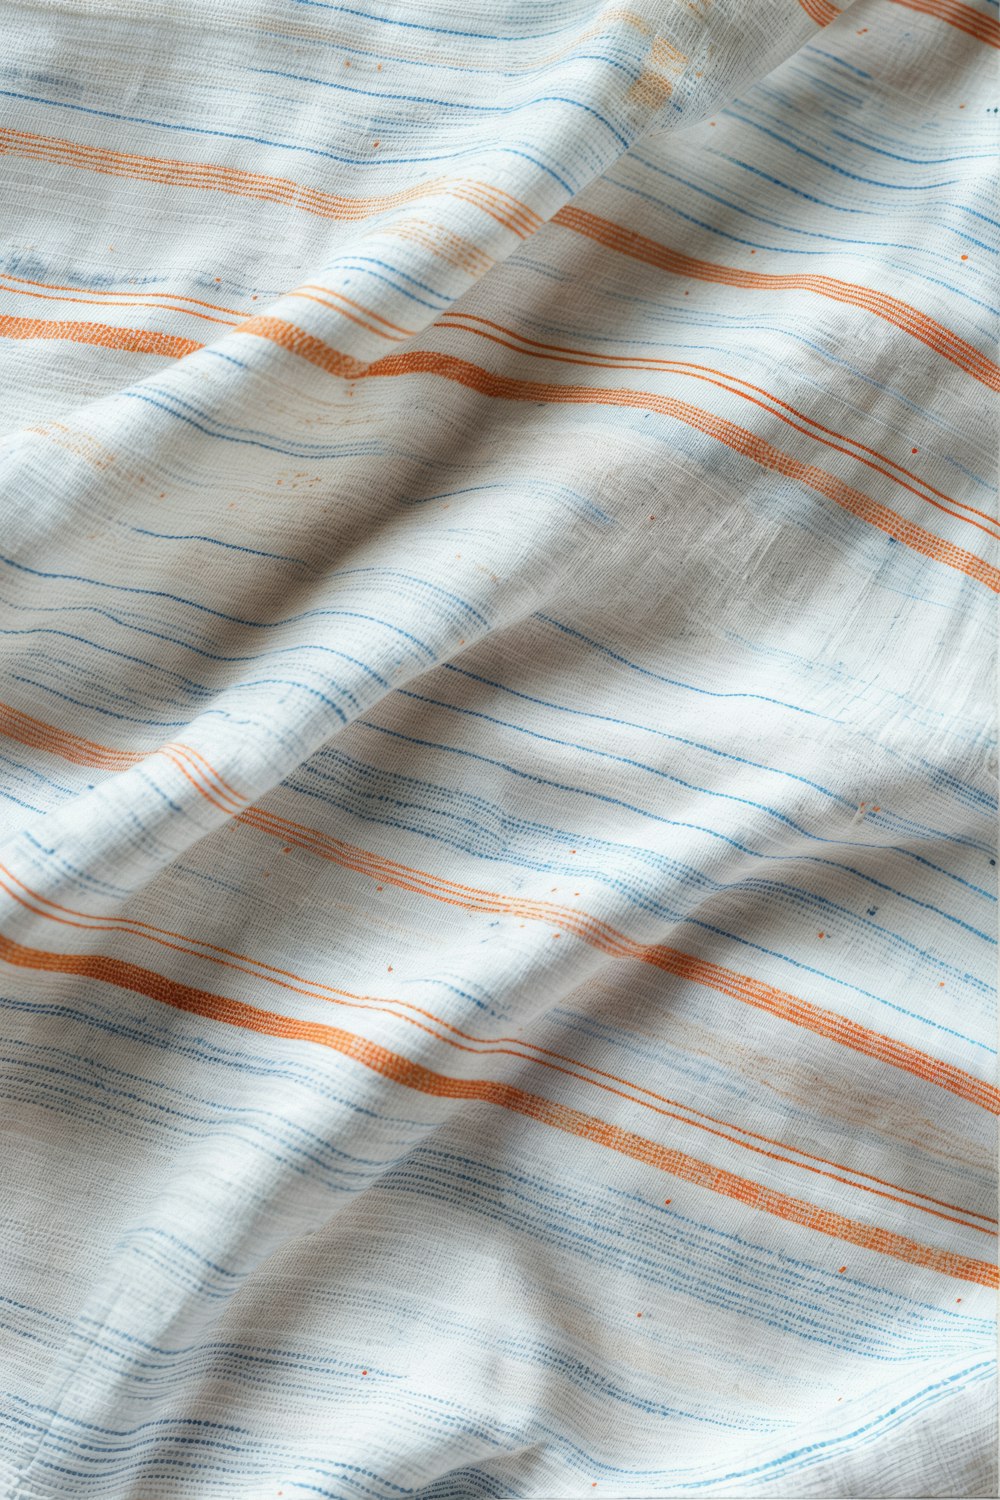 a close up of a white and orange striped fabric